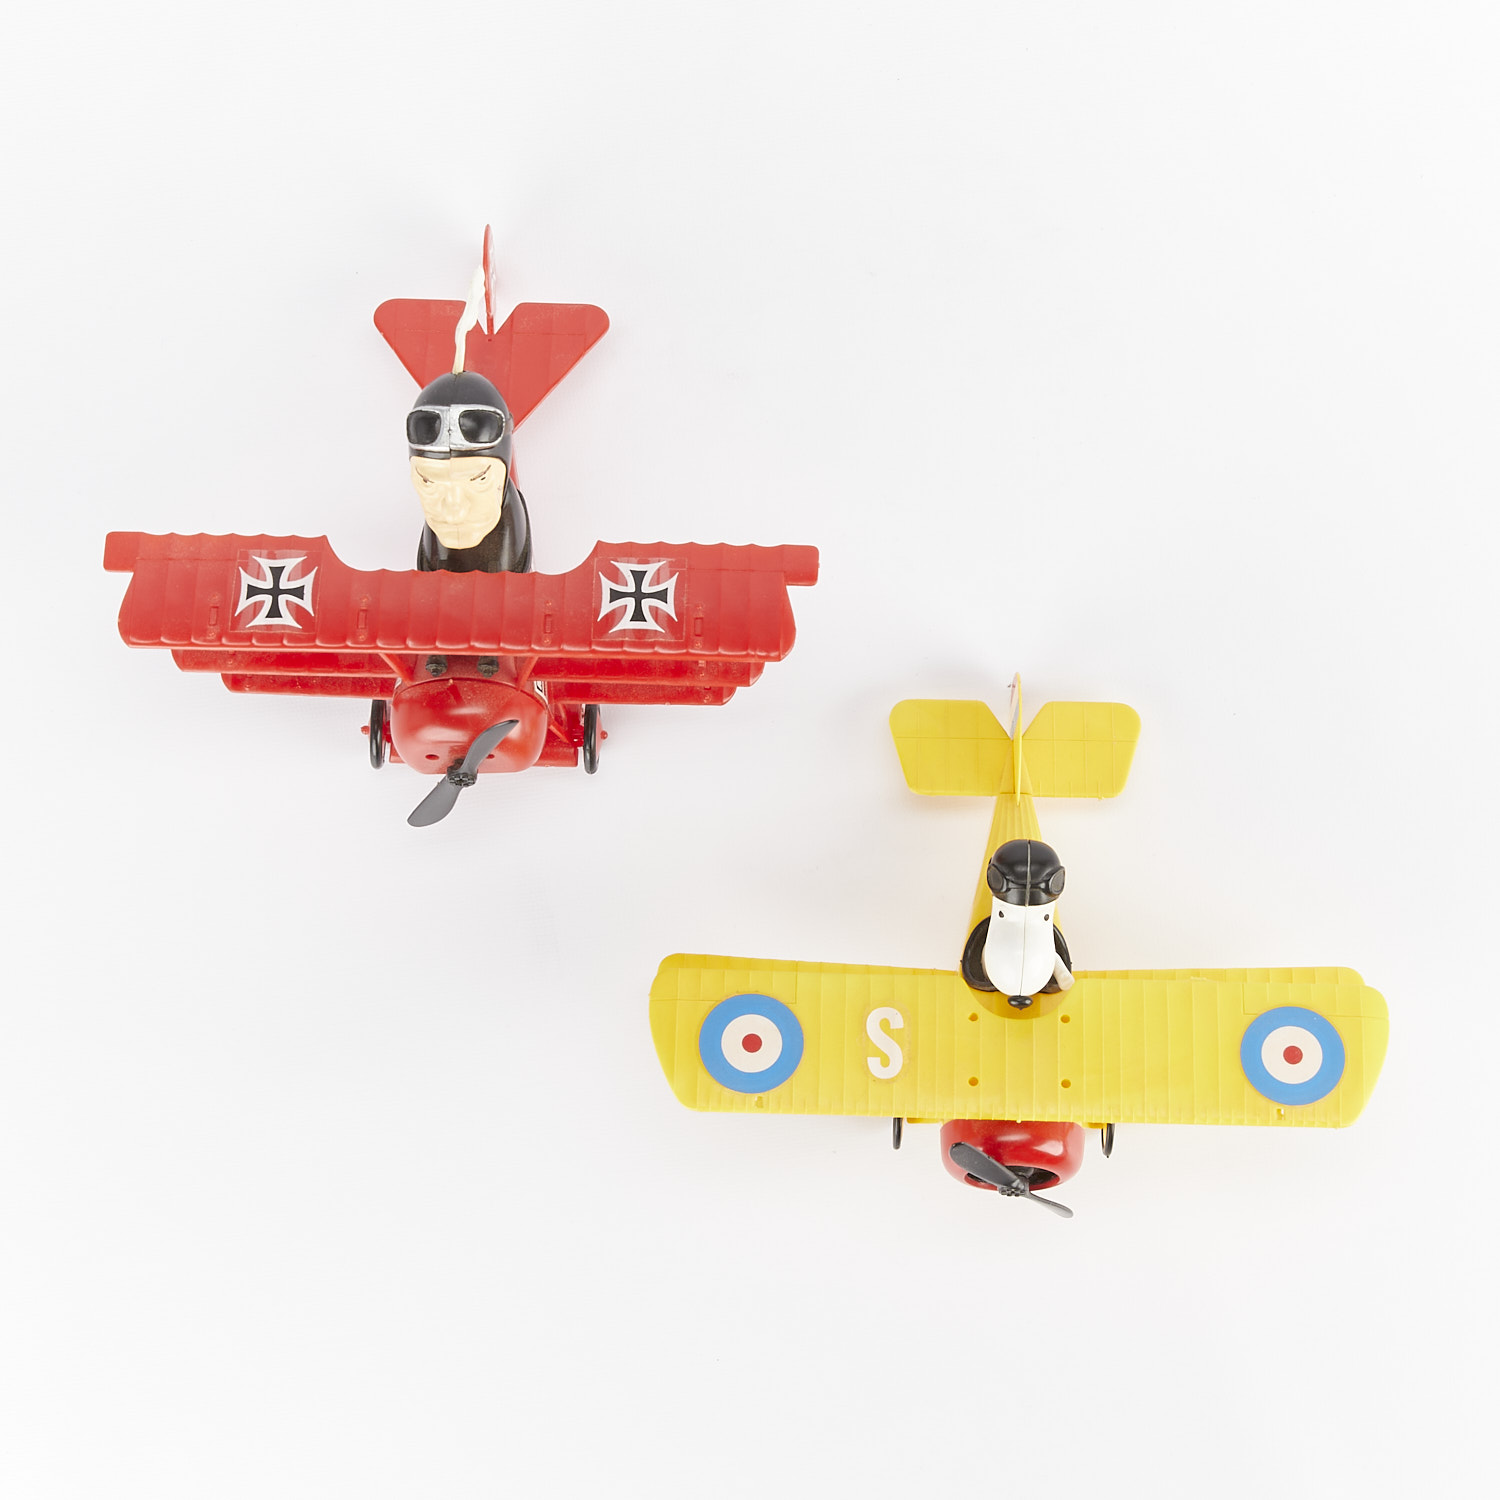 2 Toy Planes Red Baron & Flying Ace Snoopy - Image 6 of 10